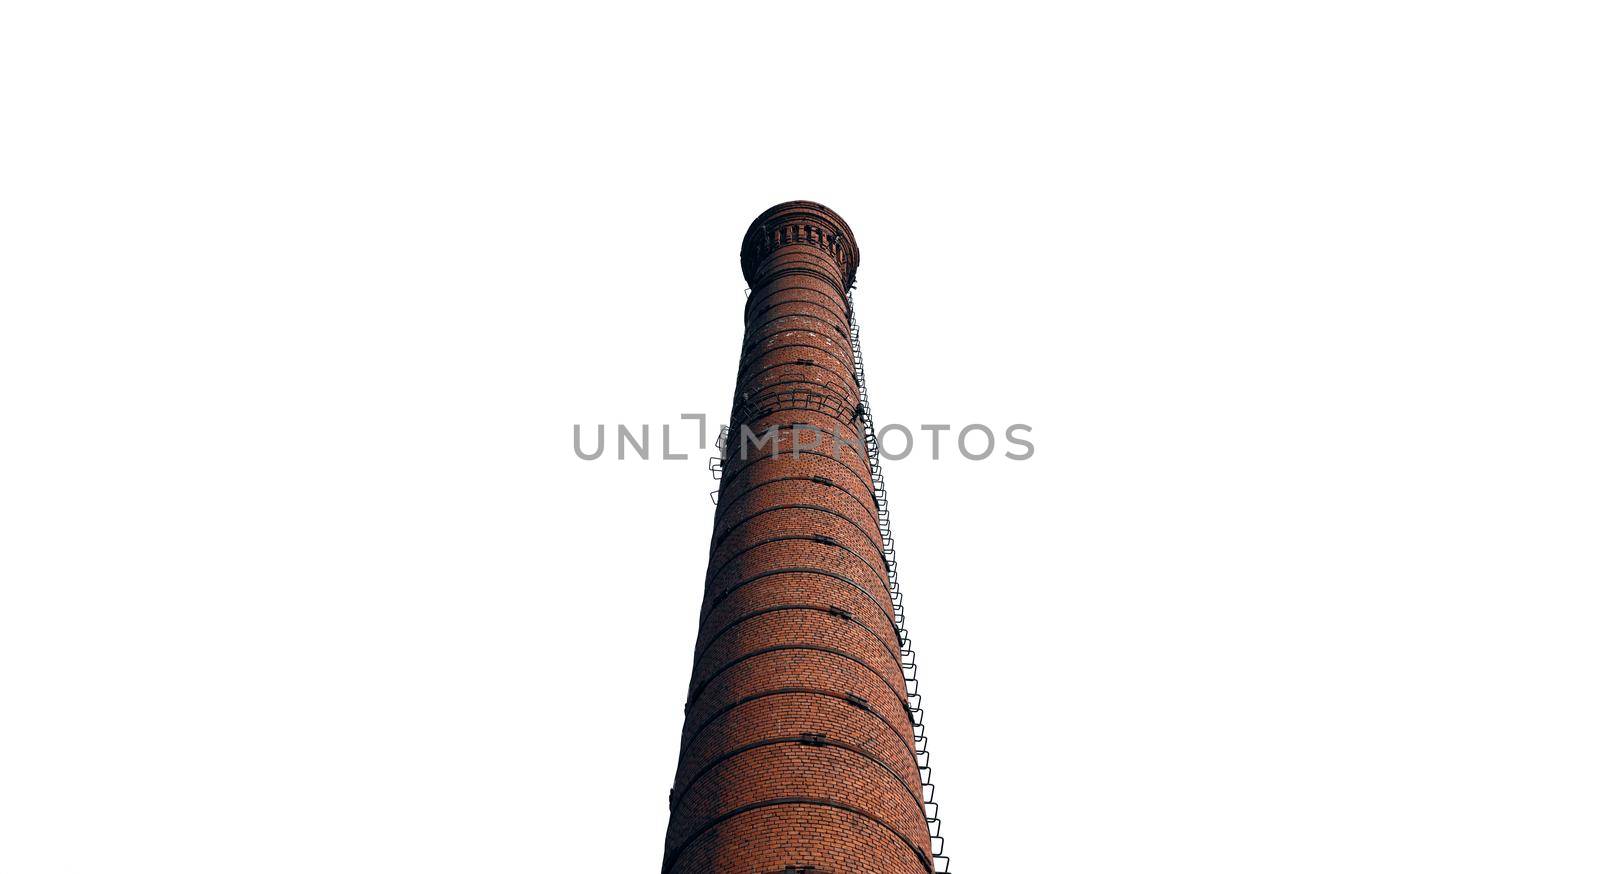 A large chimney in an old factory. smoke stack An old brick chimney on a white background.